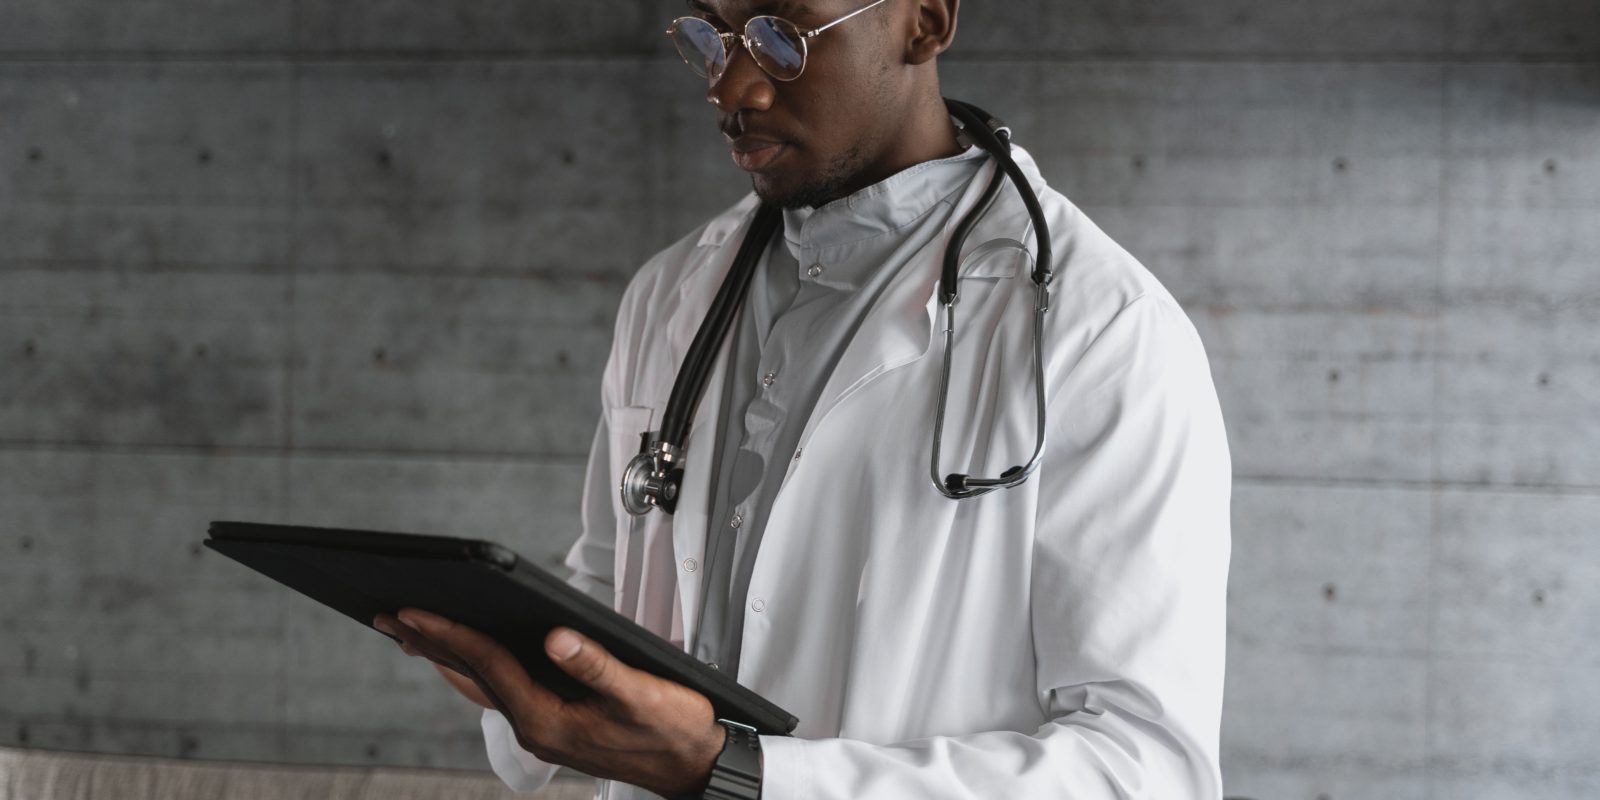 Doctor in white lab coat holding iPad